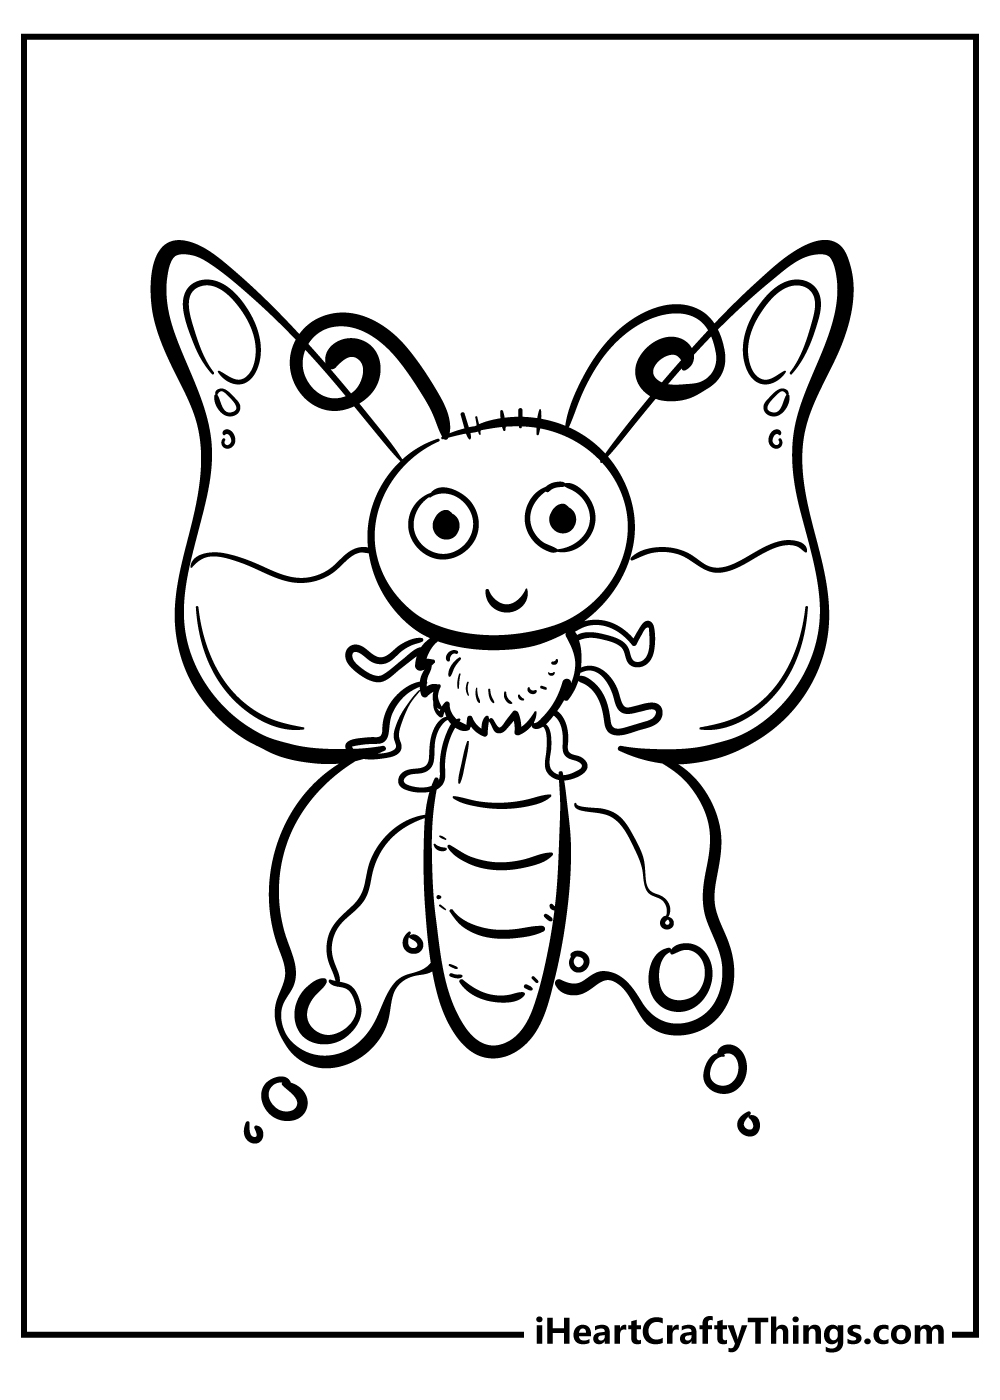 Insect coloring pages free printables